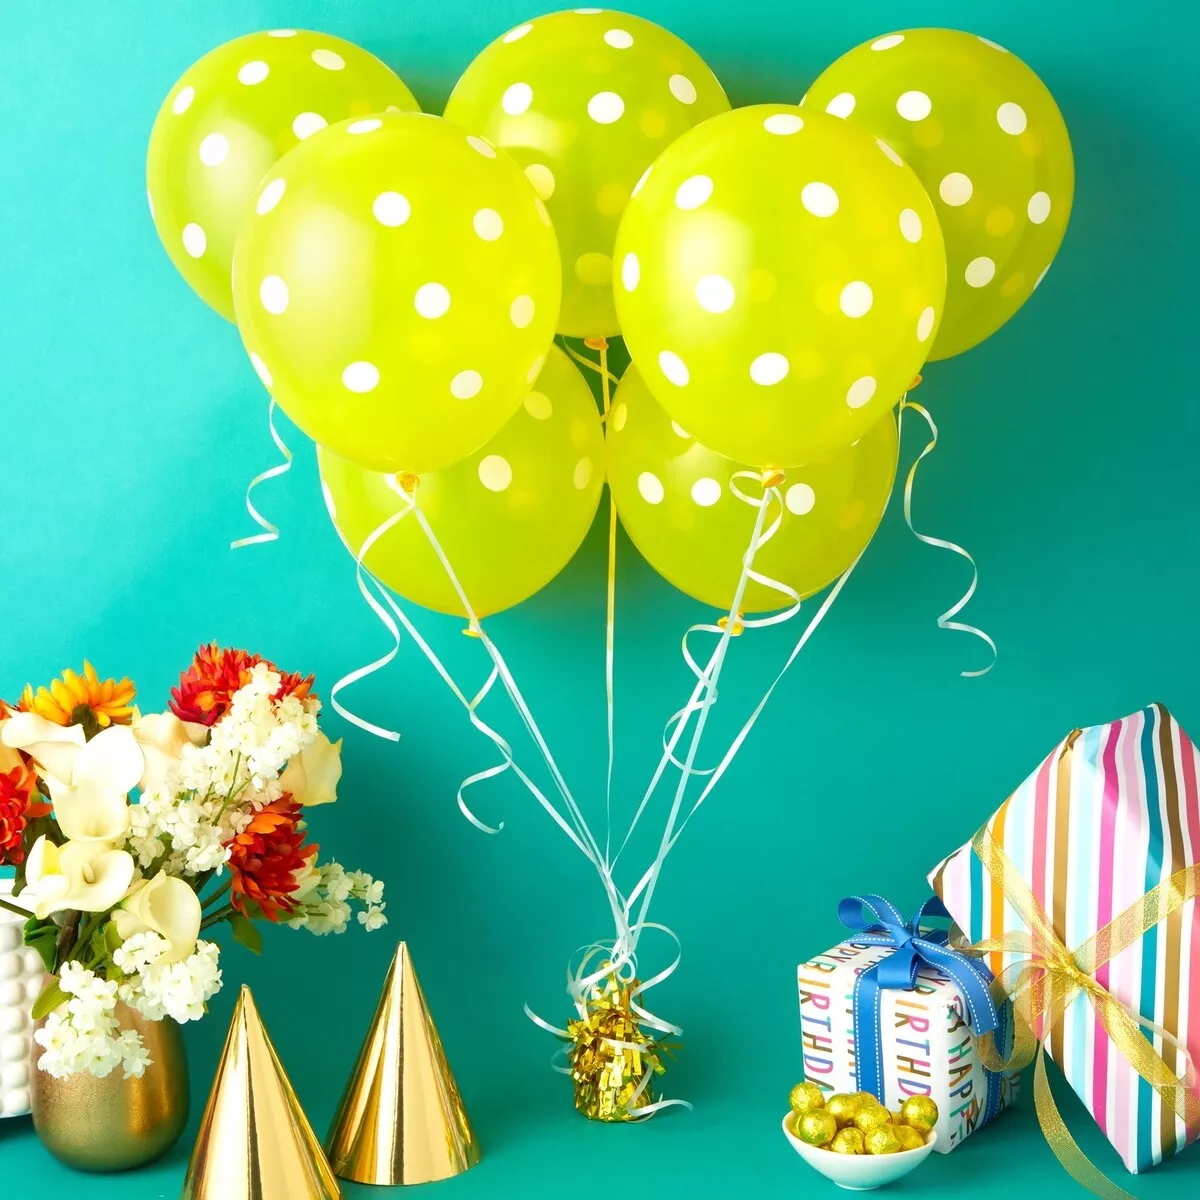 Green Polka Dot Balloons for Birthday Party with Gold Weight